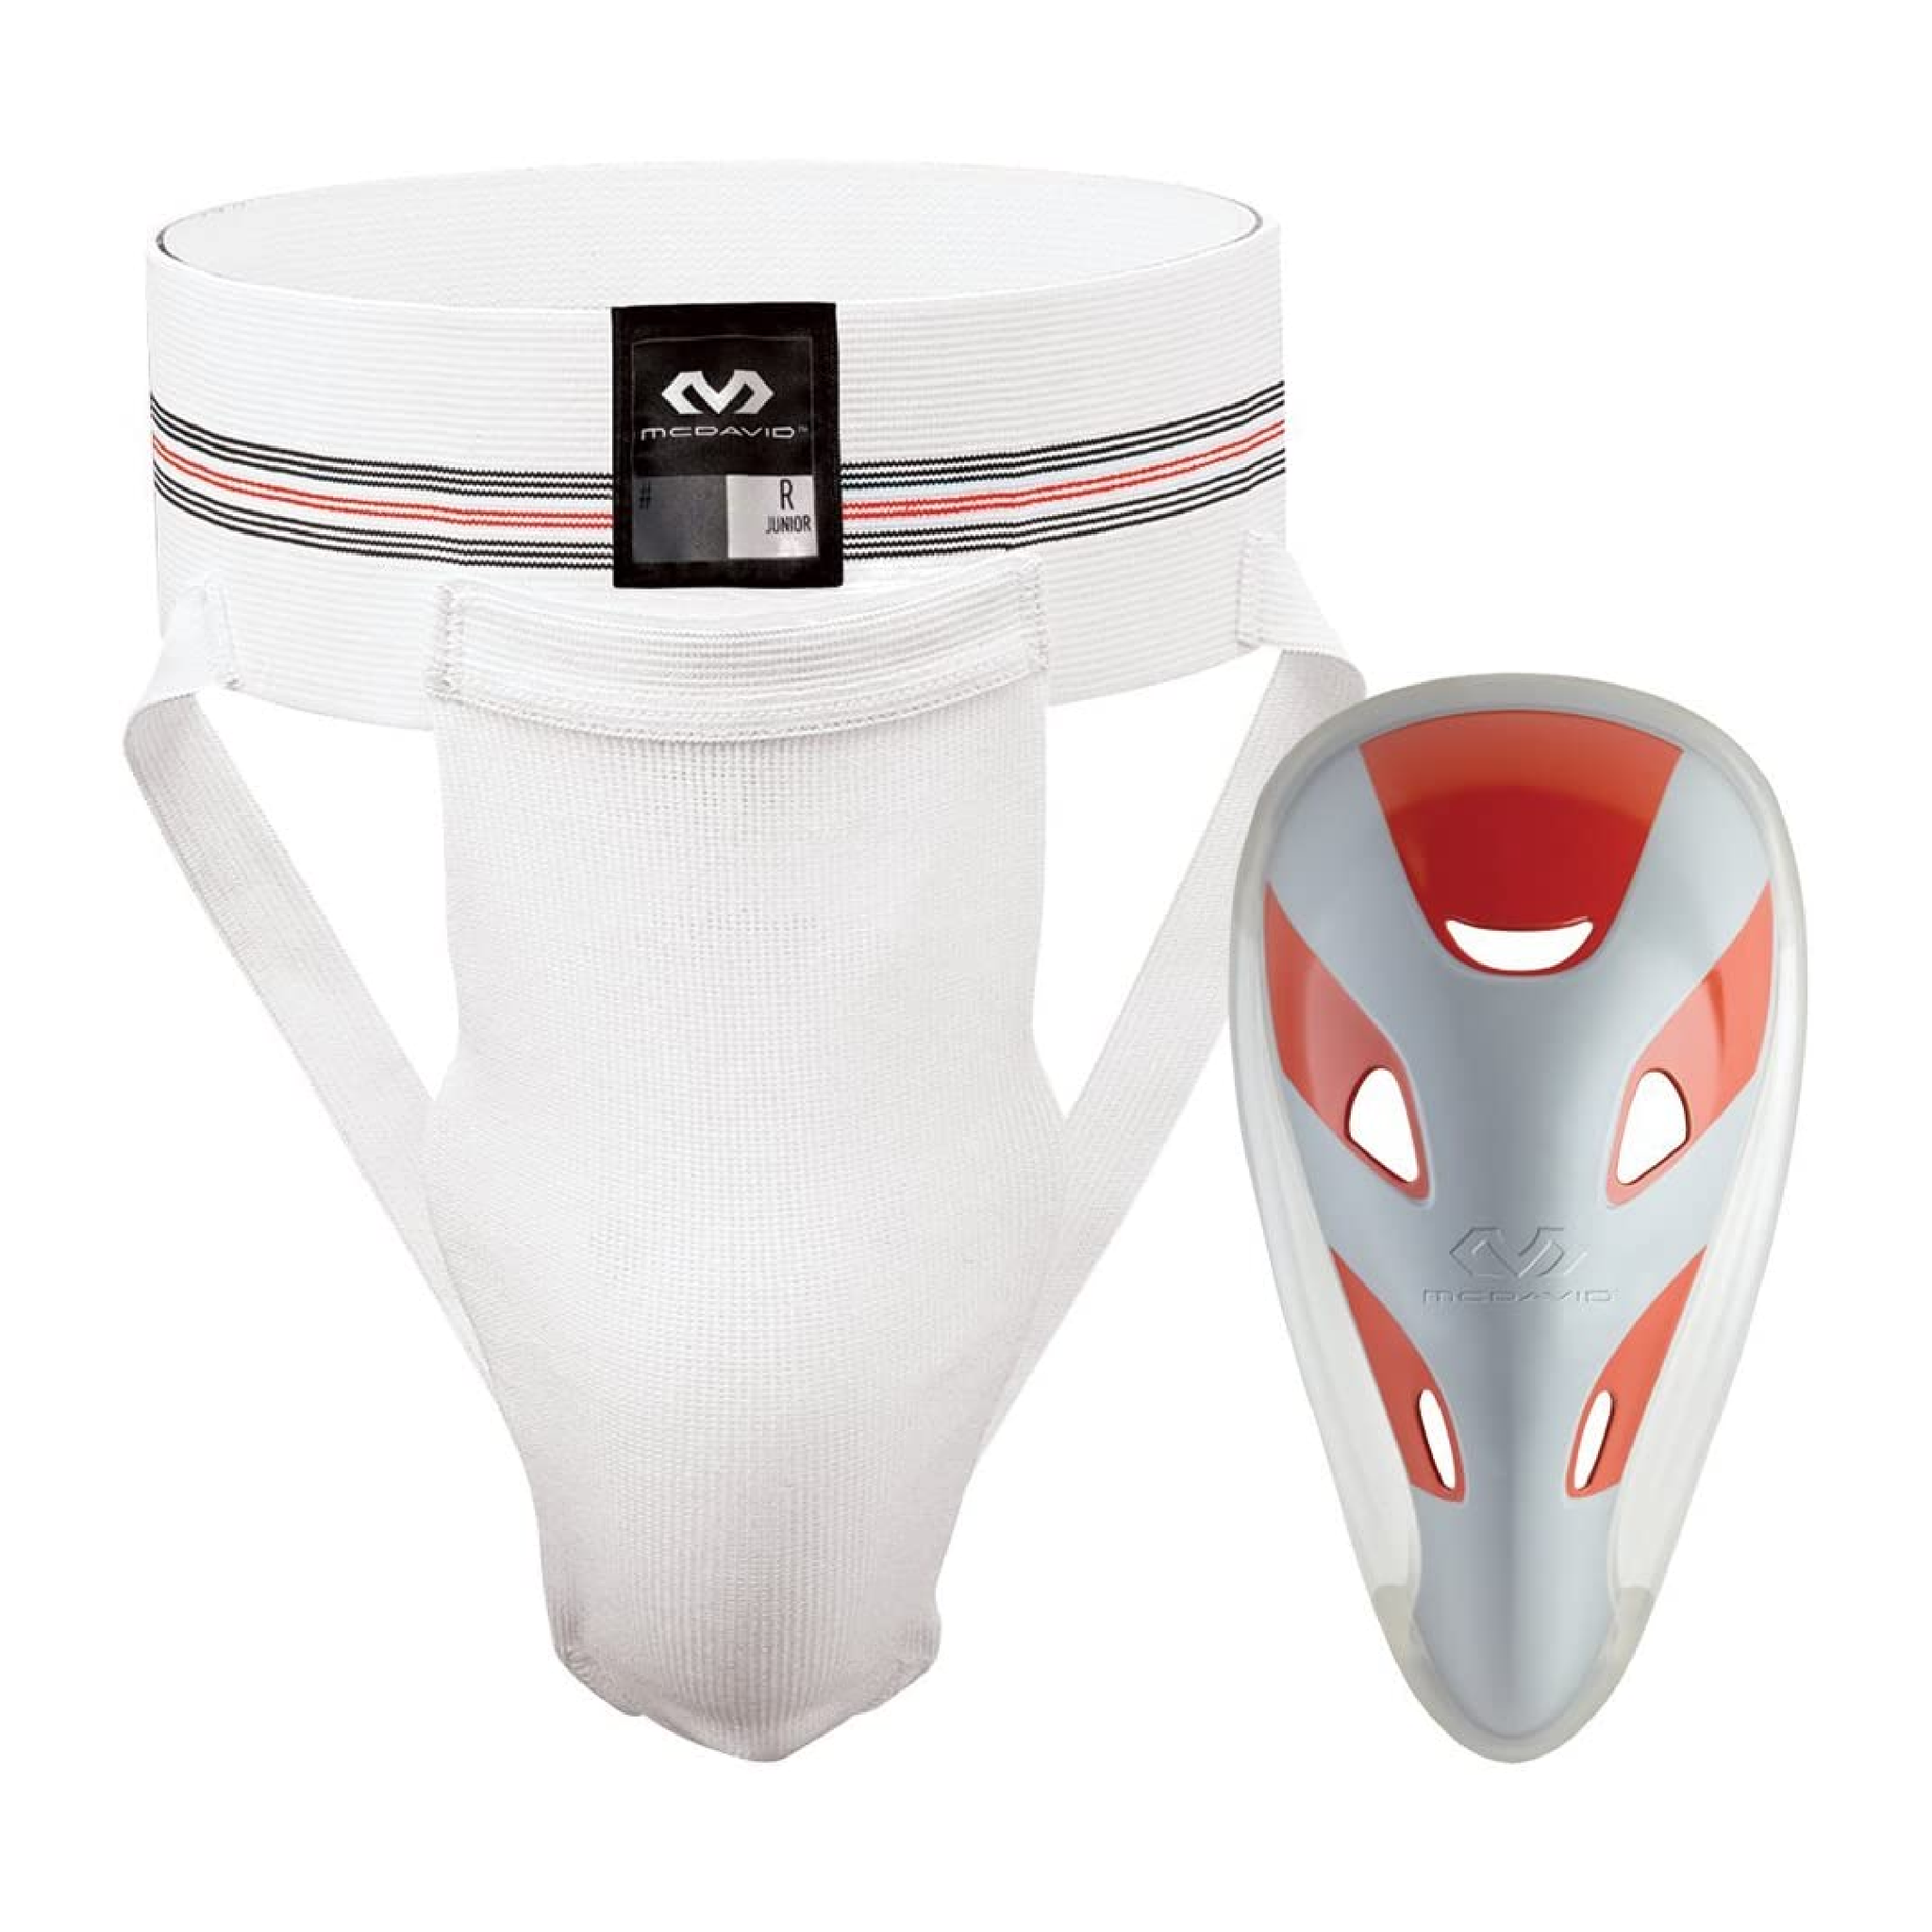 McDavid Athletic Supporter with FlexCup